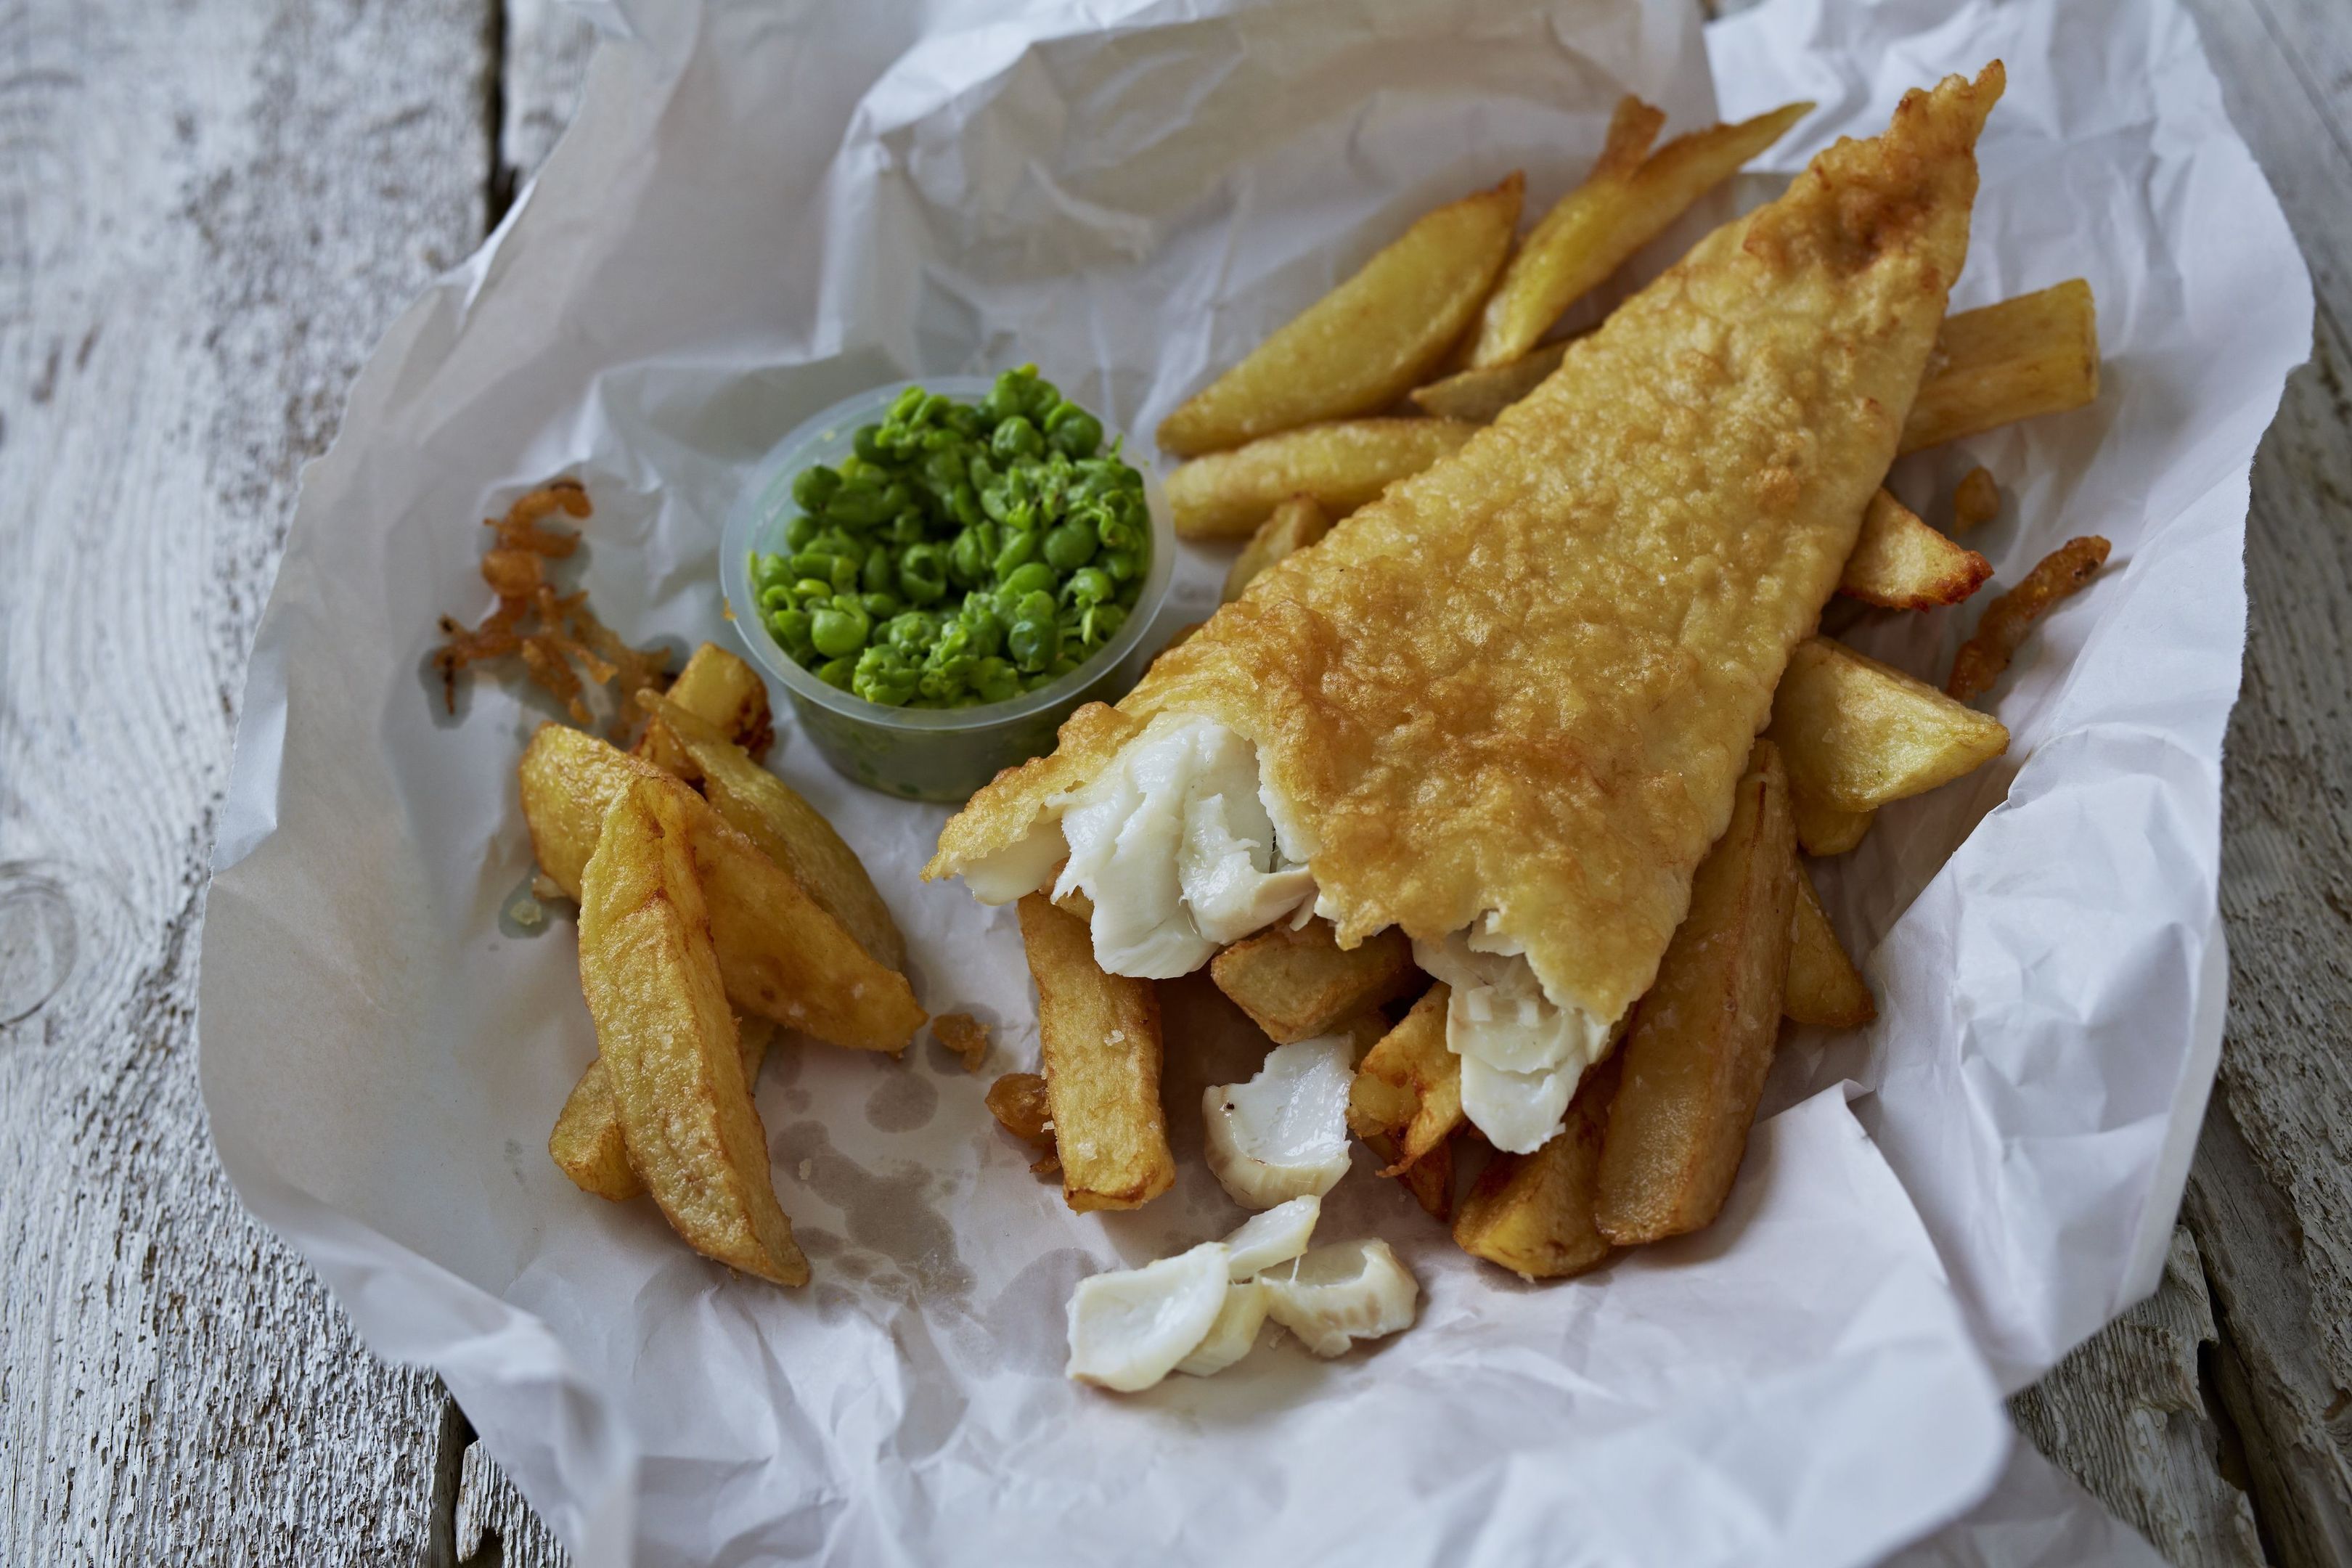 British-caught cod is back on the menu for shoppers and diners who care if their fish is sustainable, a decade after stocks came close to collapse. (Clive Streeter/MSC/PA Wire)